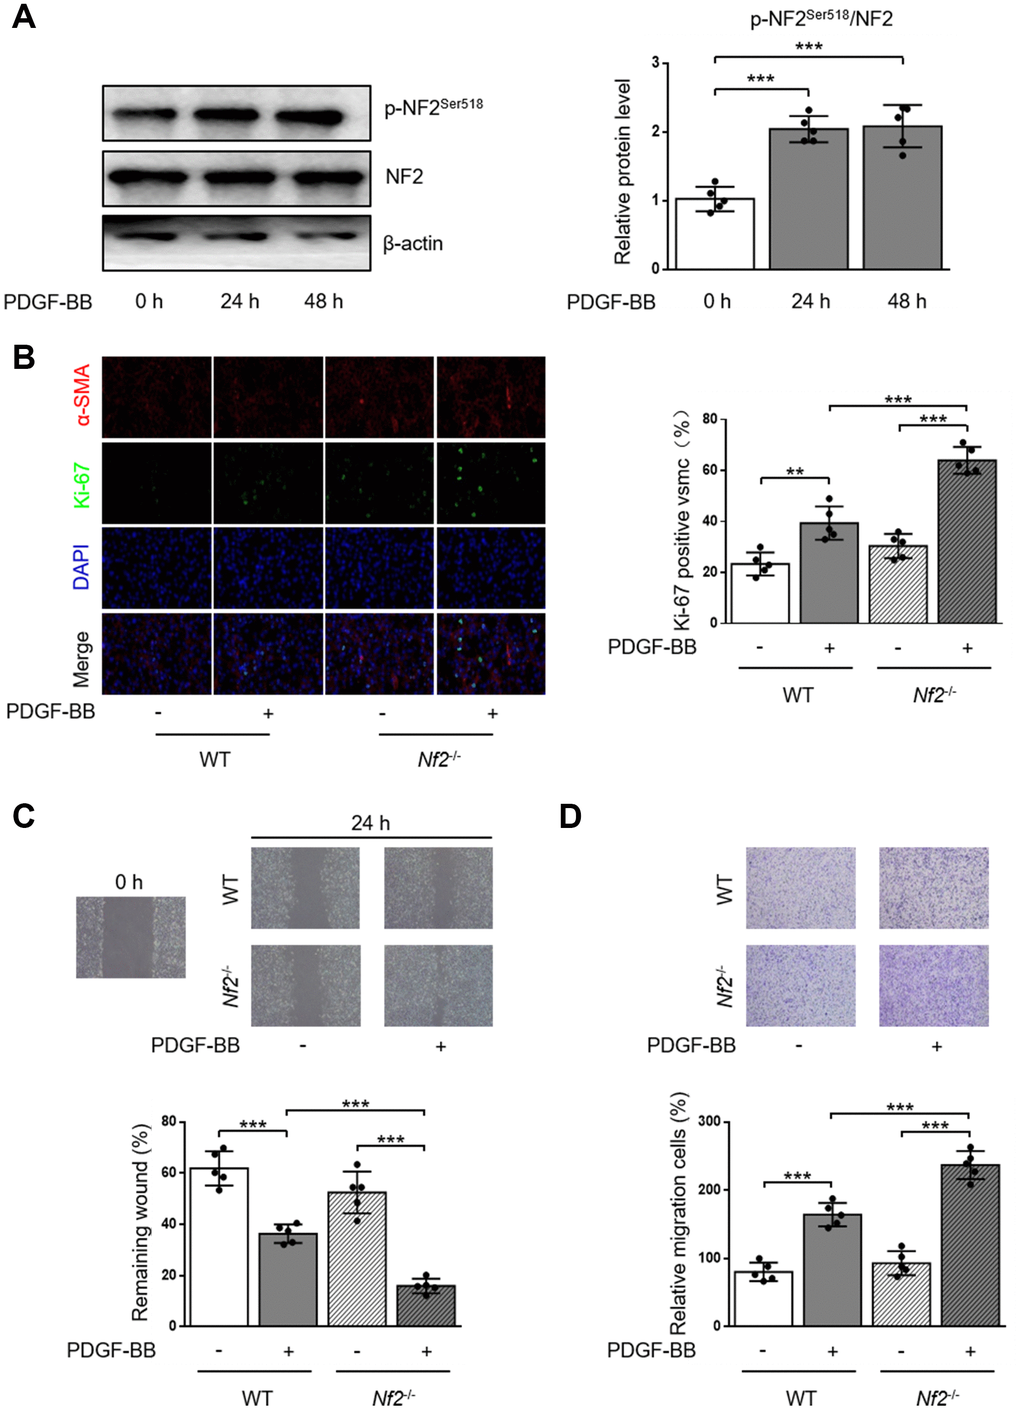 VSMC proliferation and migration in vitro is elevated after NF2 knockdown. (A) The relative protein expression levels of p-NF2Ser518 and NF2 were determined by immunoblotting in VSMC after 0, 24 and 48 h of physiological saline or PDGF-BB (30 ng/mL) treatment (n=5). (B) VSMC isolated from WT or Nf2-/- mice was stained with SM α-actin (red), Ki-67 (green) and DAPI (blue) after 48 h of physiological saline or PDGF-BB (30 ng/mL) treatment. Representative images (left) and corresponding quantification of Ki-67 positive VSMC (right) were shown (n=5). Magnification 400×. (C) Migration of VSMC isolated from WT and Nf2-/- mice after 24 h of physiological saline or PDGF-BB (30 ng/mL) treatment was measured via wound healing assay. Representative images (upper panel) and corresponding quantification of healing rates (lower panel) were shown (n=5). Magnification 100×. (D) VSMC isolated from WT or Nf2-/- mice after 8 h of physiological saline or PDGF-BB (30 ng/mL) treatment was assessed by transwell assay. Representative images (upper panel) and corresponding quantification of migration cells (lower panel) were shown (n=5). Magnification 100×. Data are shown as mean ± S.D. **PP